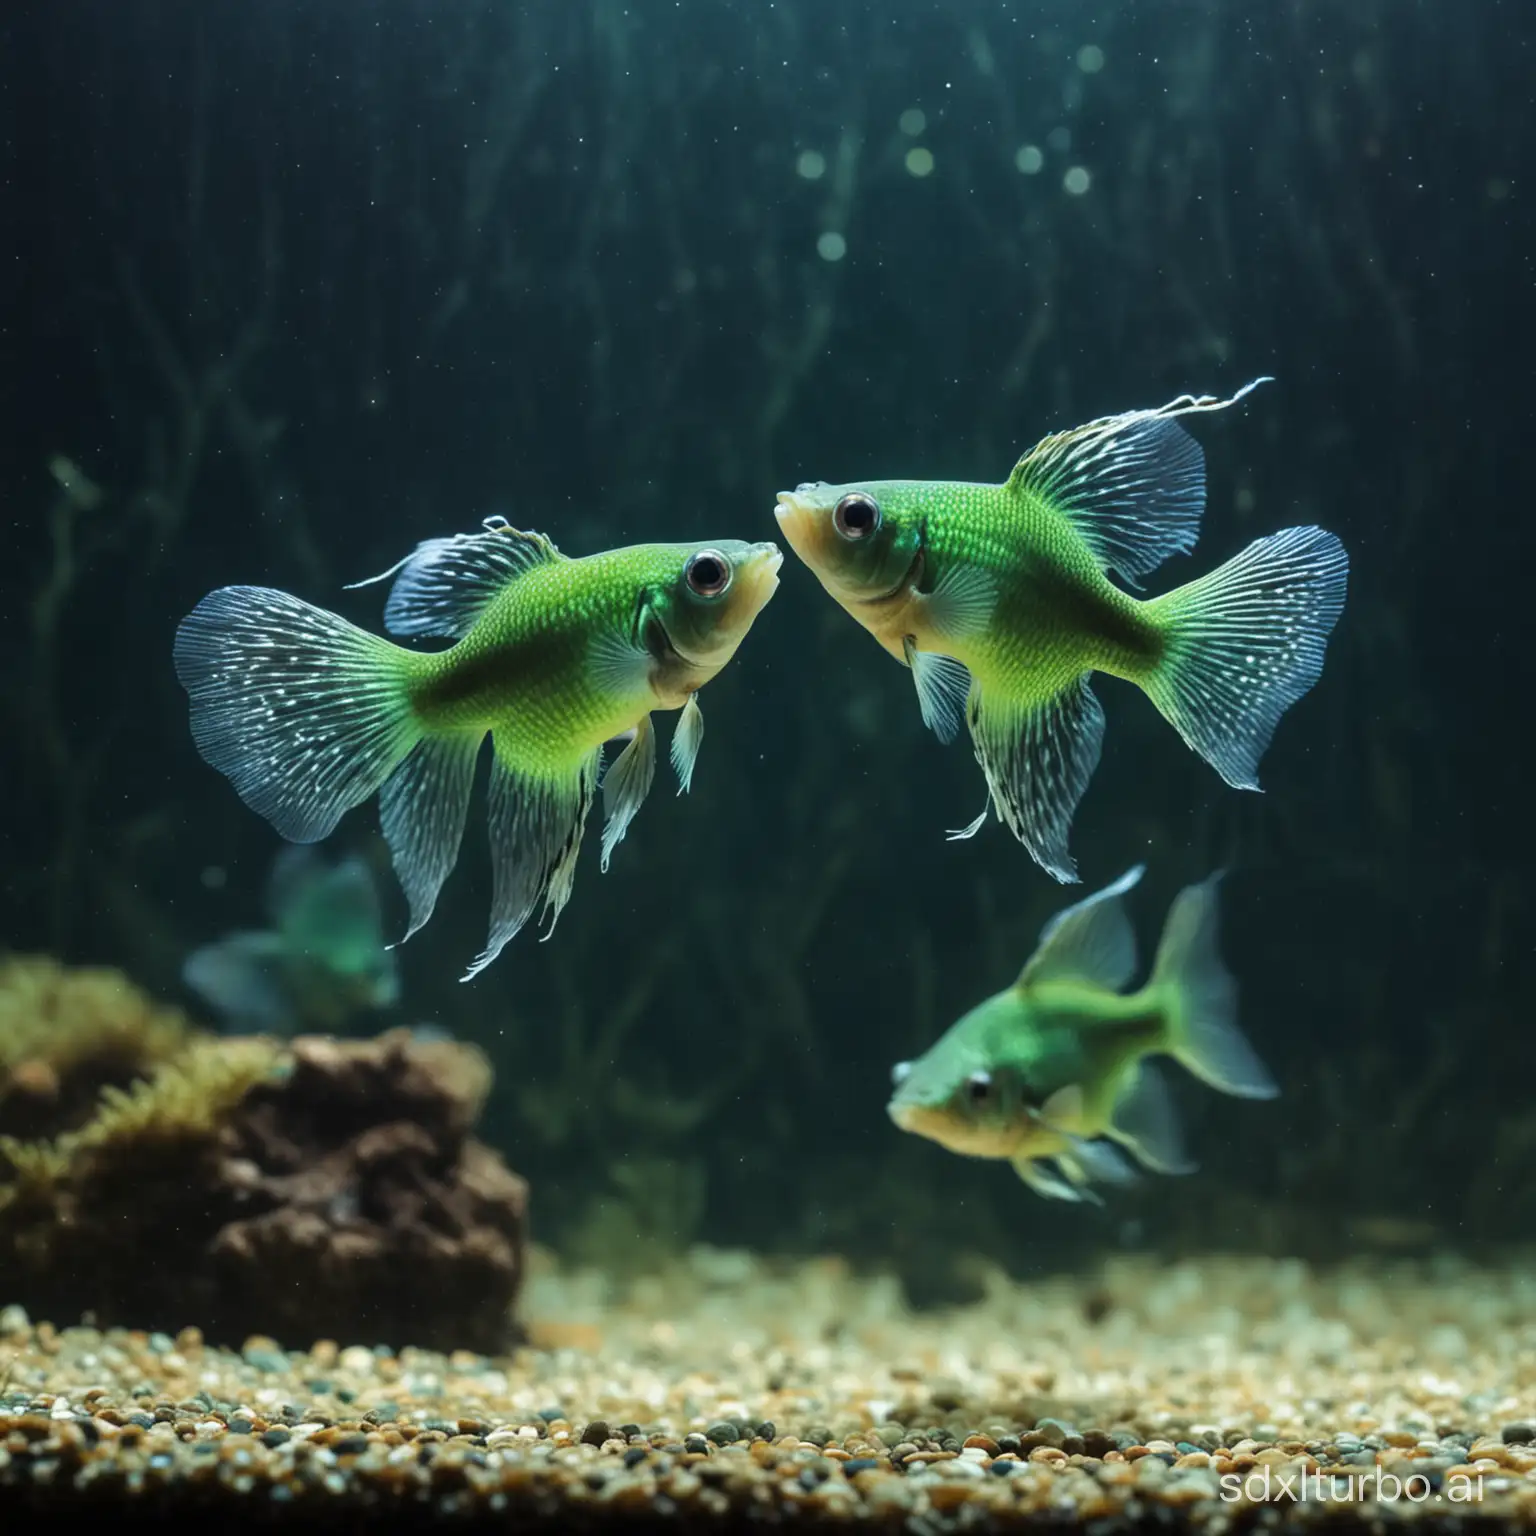 Beautiful-Guppies-in-a-Rule-of-Thirds-Composition-with-Green-Aquarium-Lighting